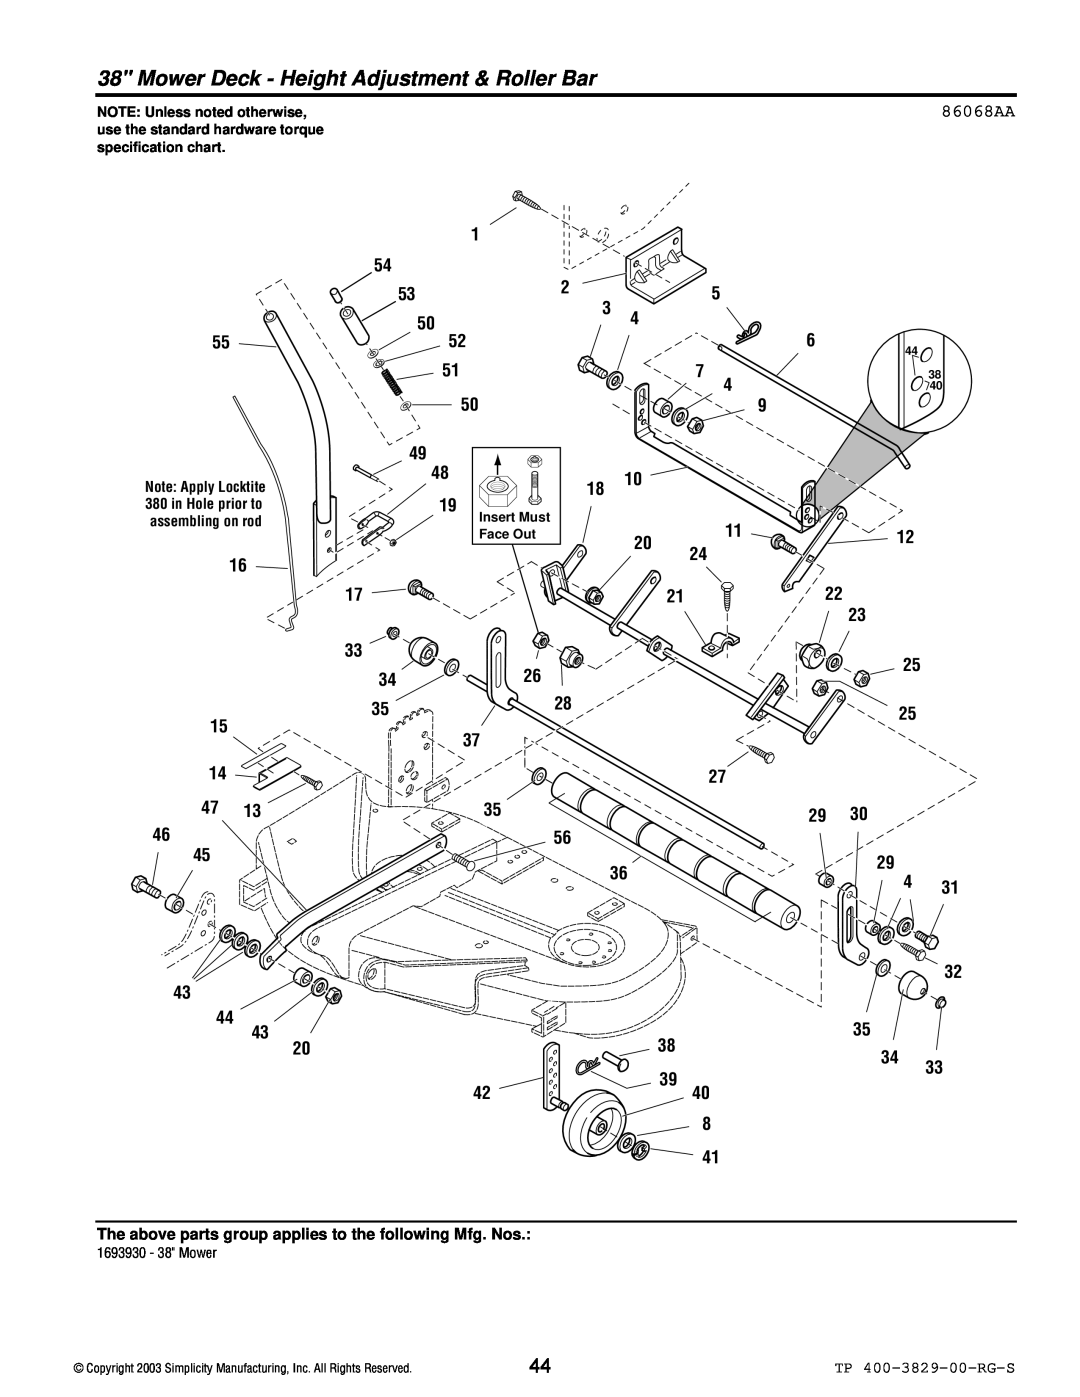 Simplicity 1694310 Mower Deck - Height Adjustment & Roller Bar, 86068AA, TP 400-3829-00-RG-S, NOTE Unless noted otherwise 